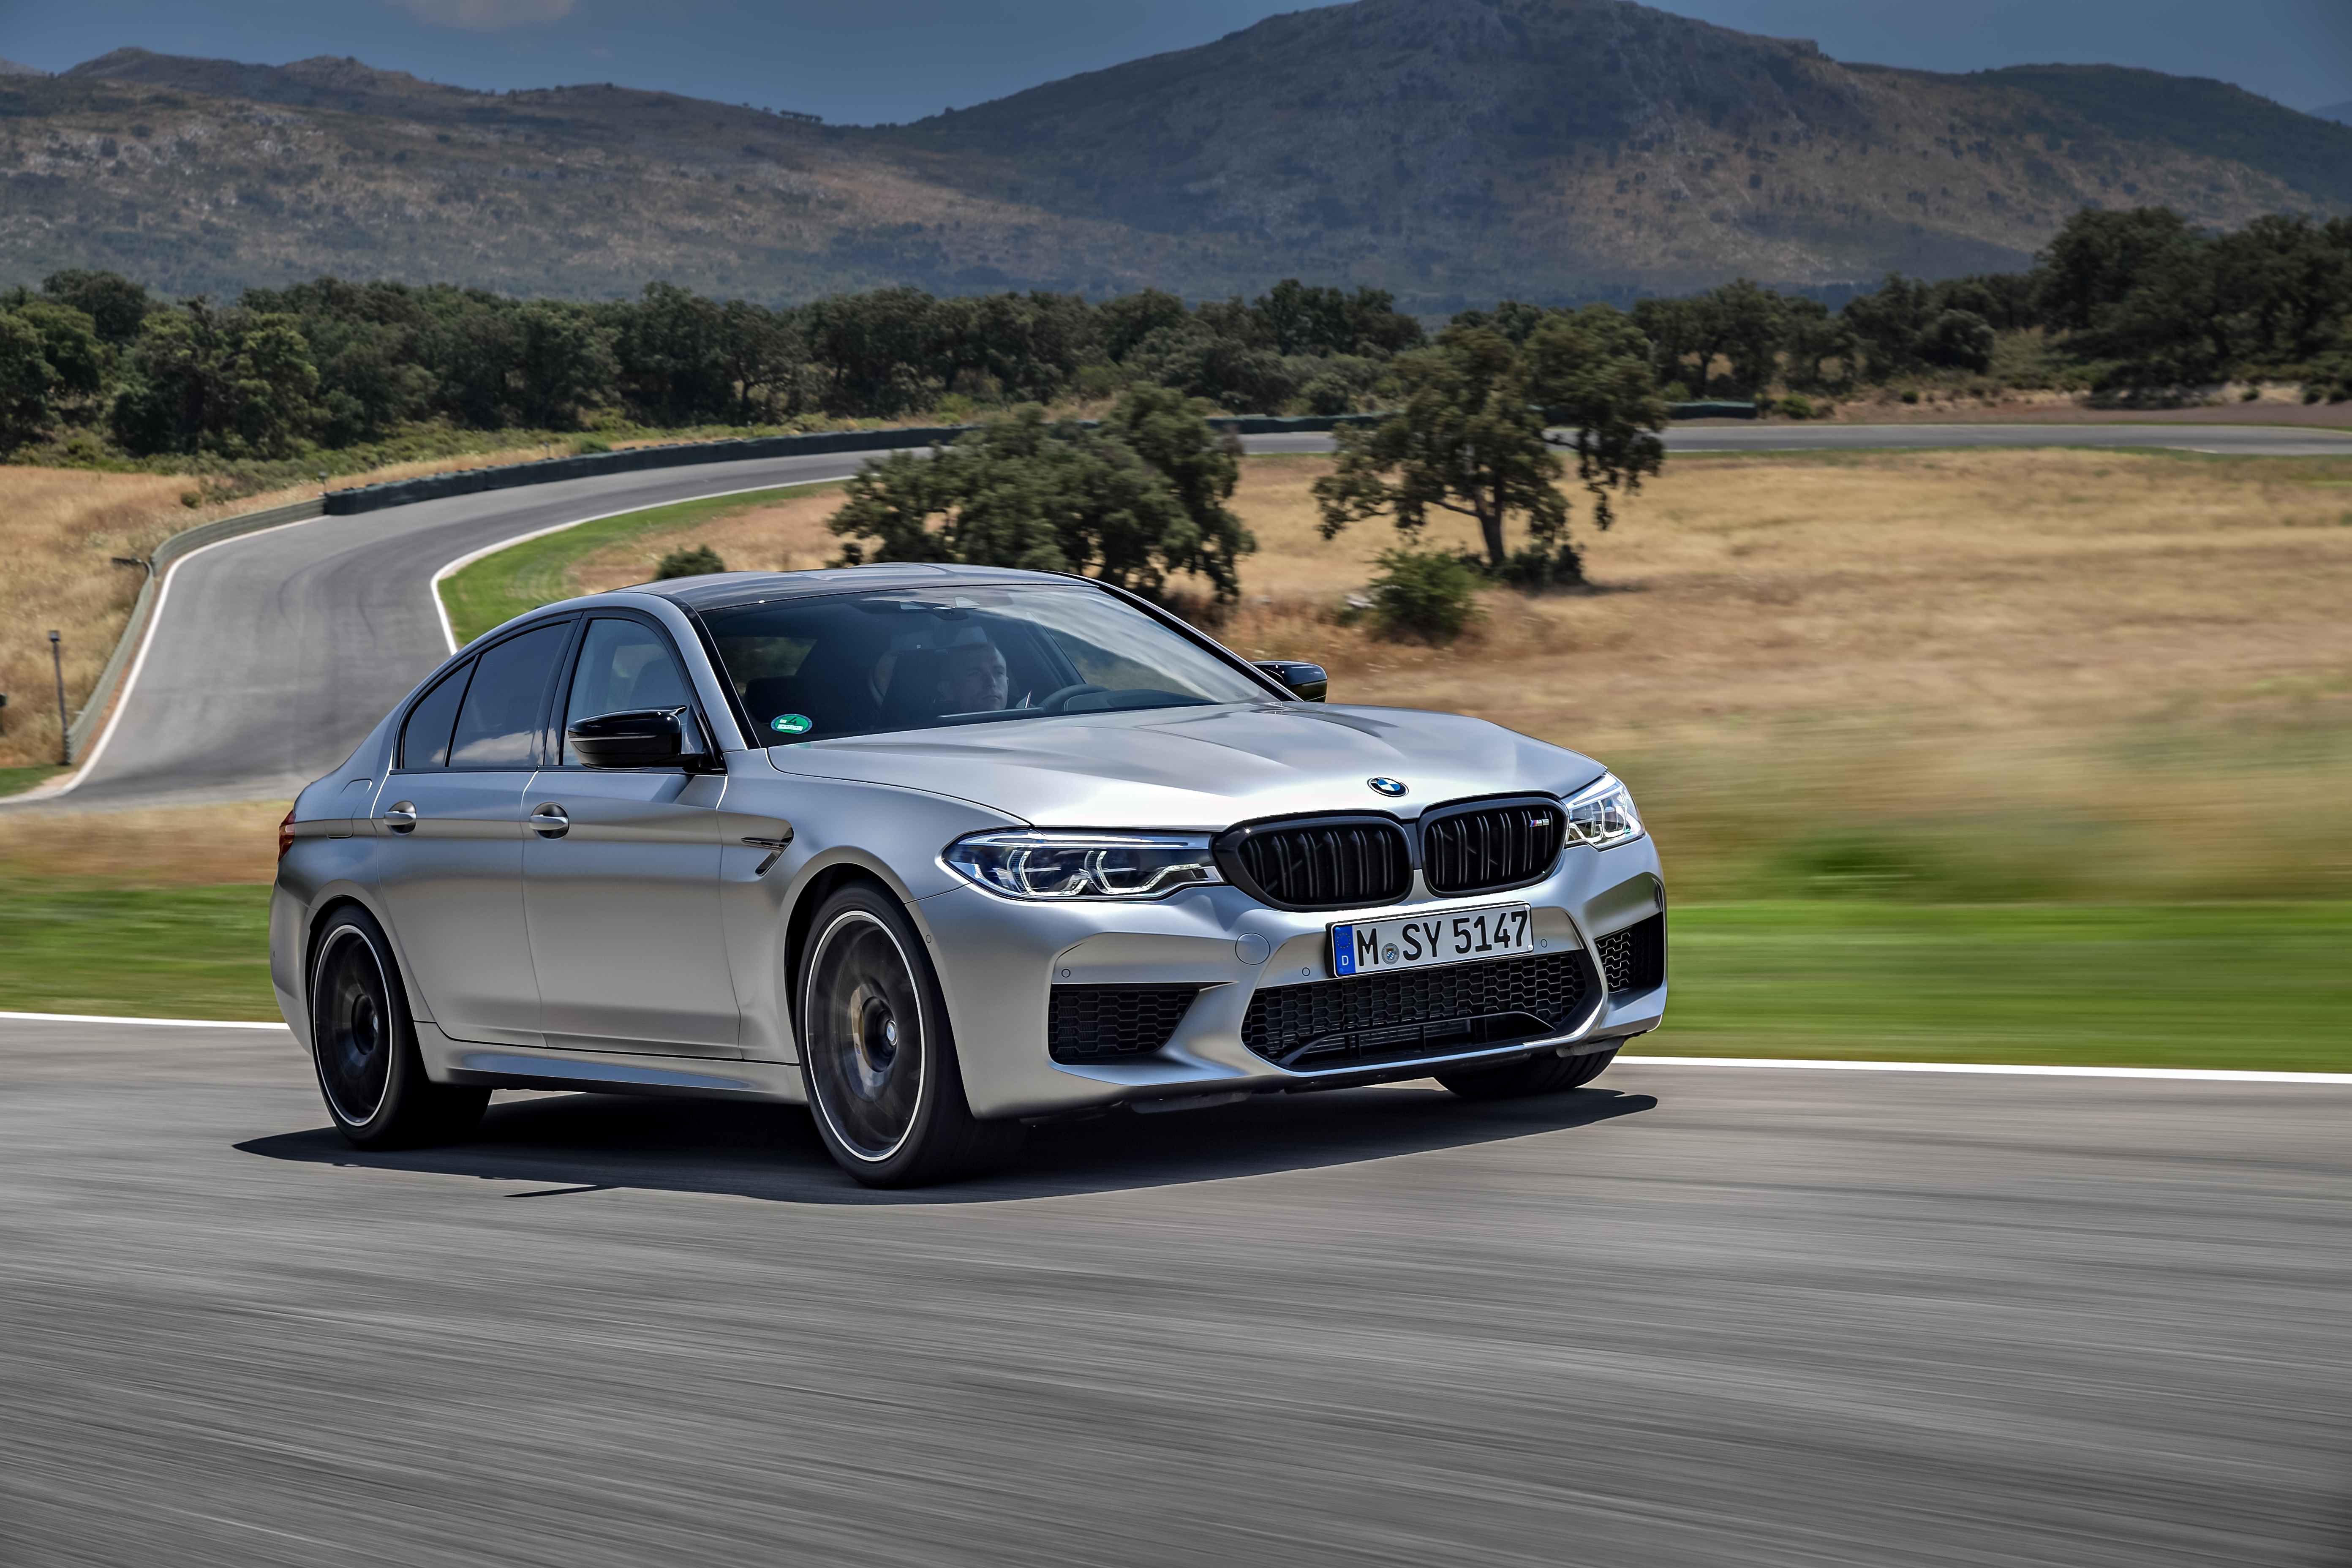 The Market Launch Of The New Bmw M5 Competition Heralds The Creation Of A New Product Category Bmw M Gmbh Will Offer The Most Powerful Variants Of Its High Performance Cars As Standalone